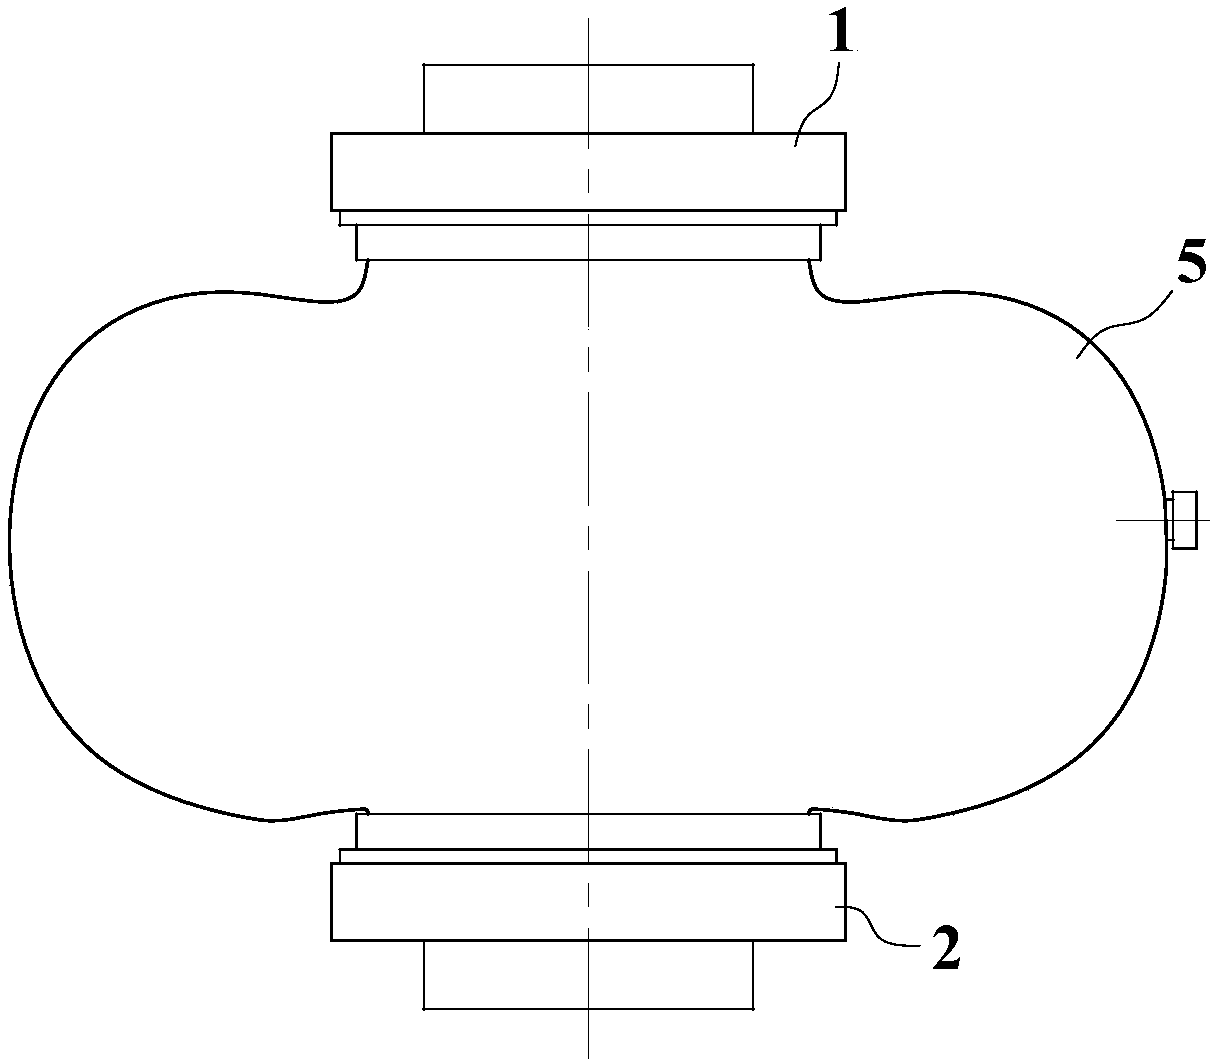 A vacuum-protected flange connection